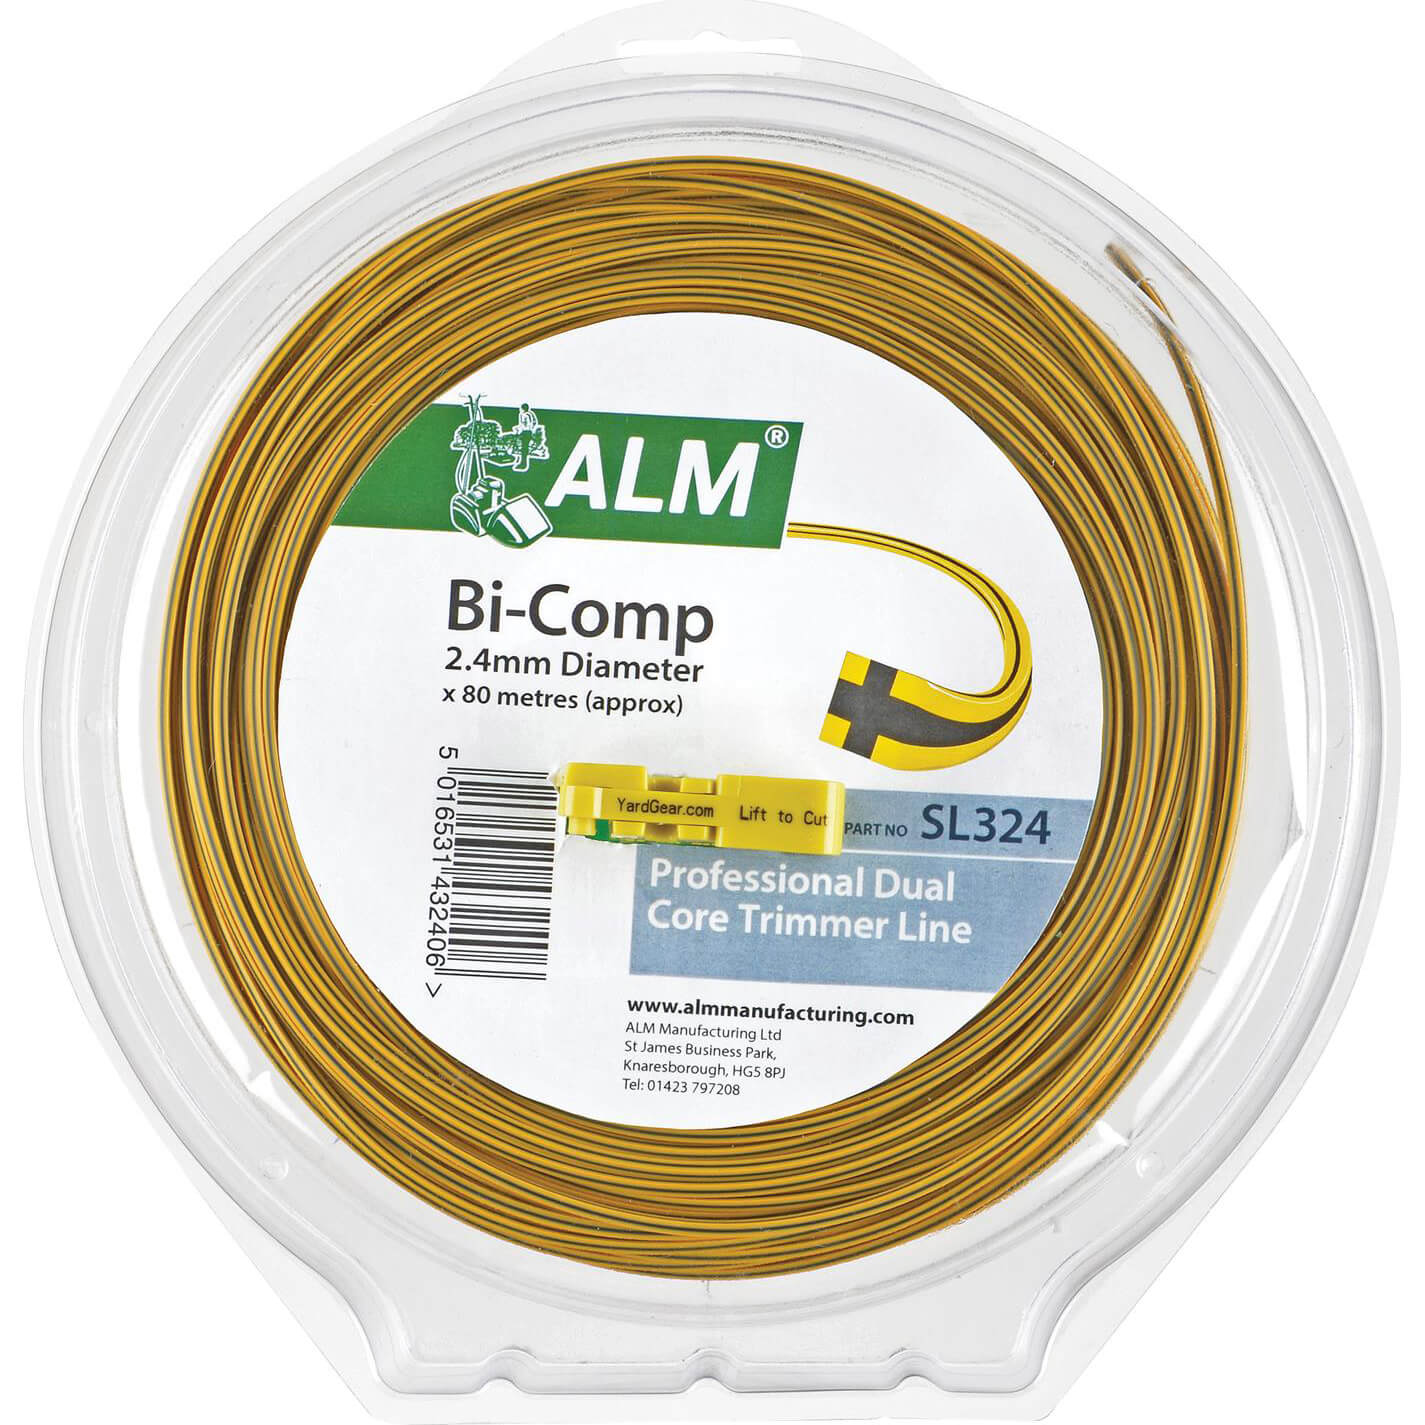 ALM SL324 Replacement Bi-Component Square Grass Trimmer Line 2.4mm x 80m for All Medium Duty Petrol Grass Trimmers using 2.4mm Line Pack of 1